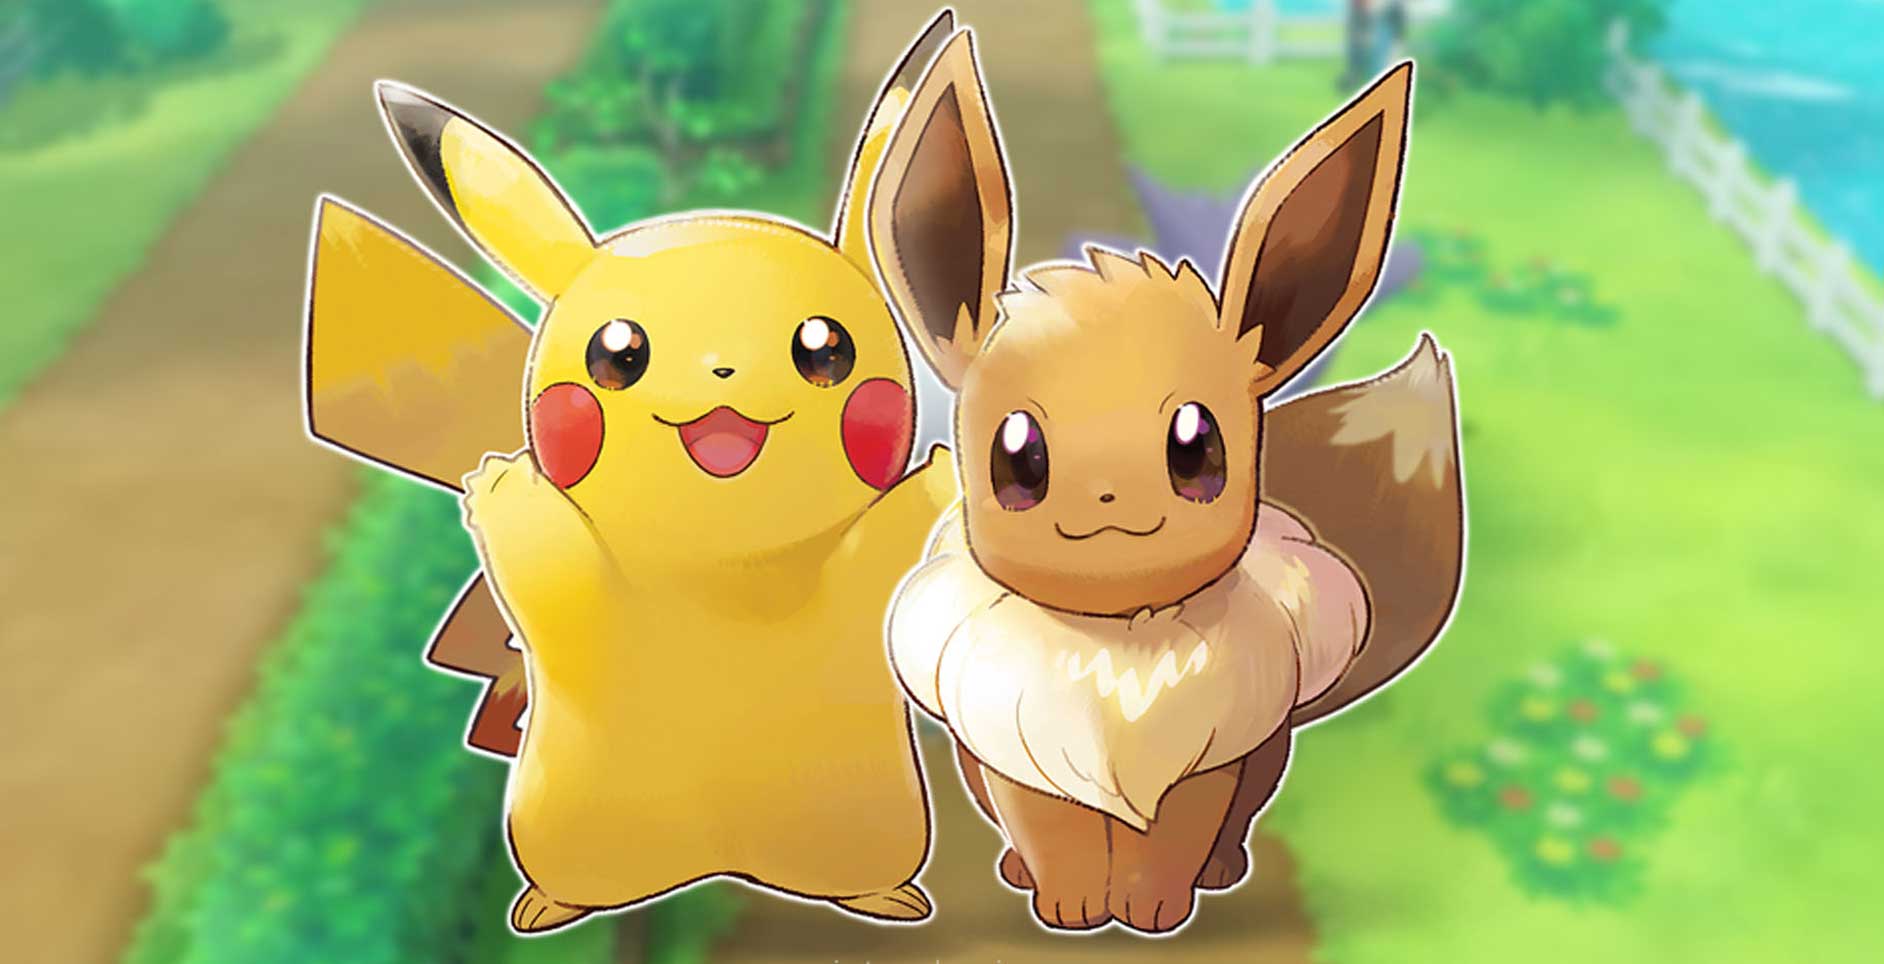 Viral Pokemon video displays Pokemon in the most adorable way